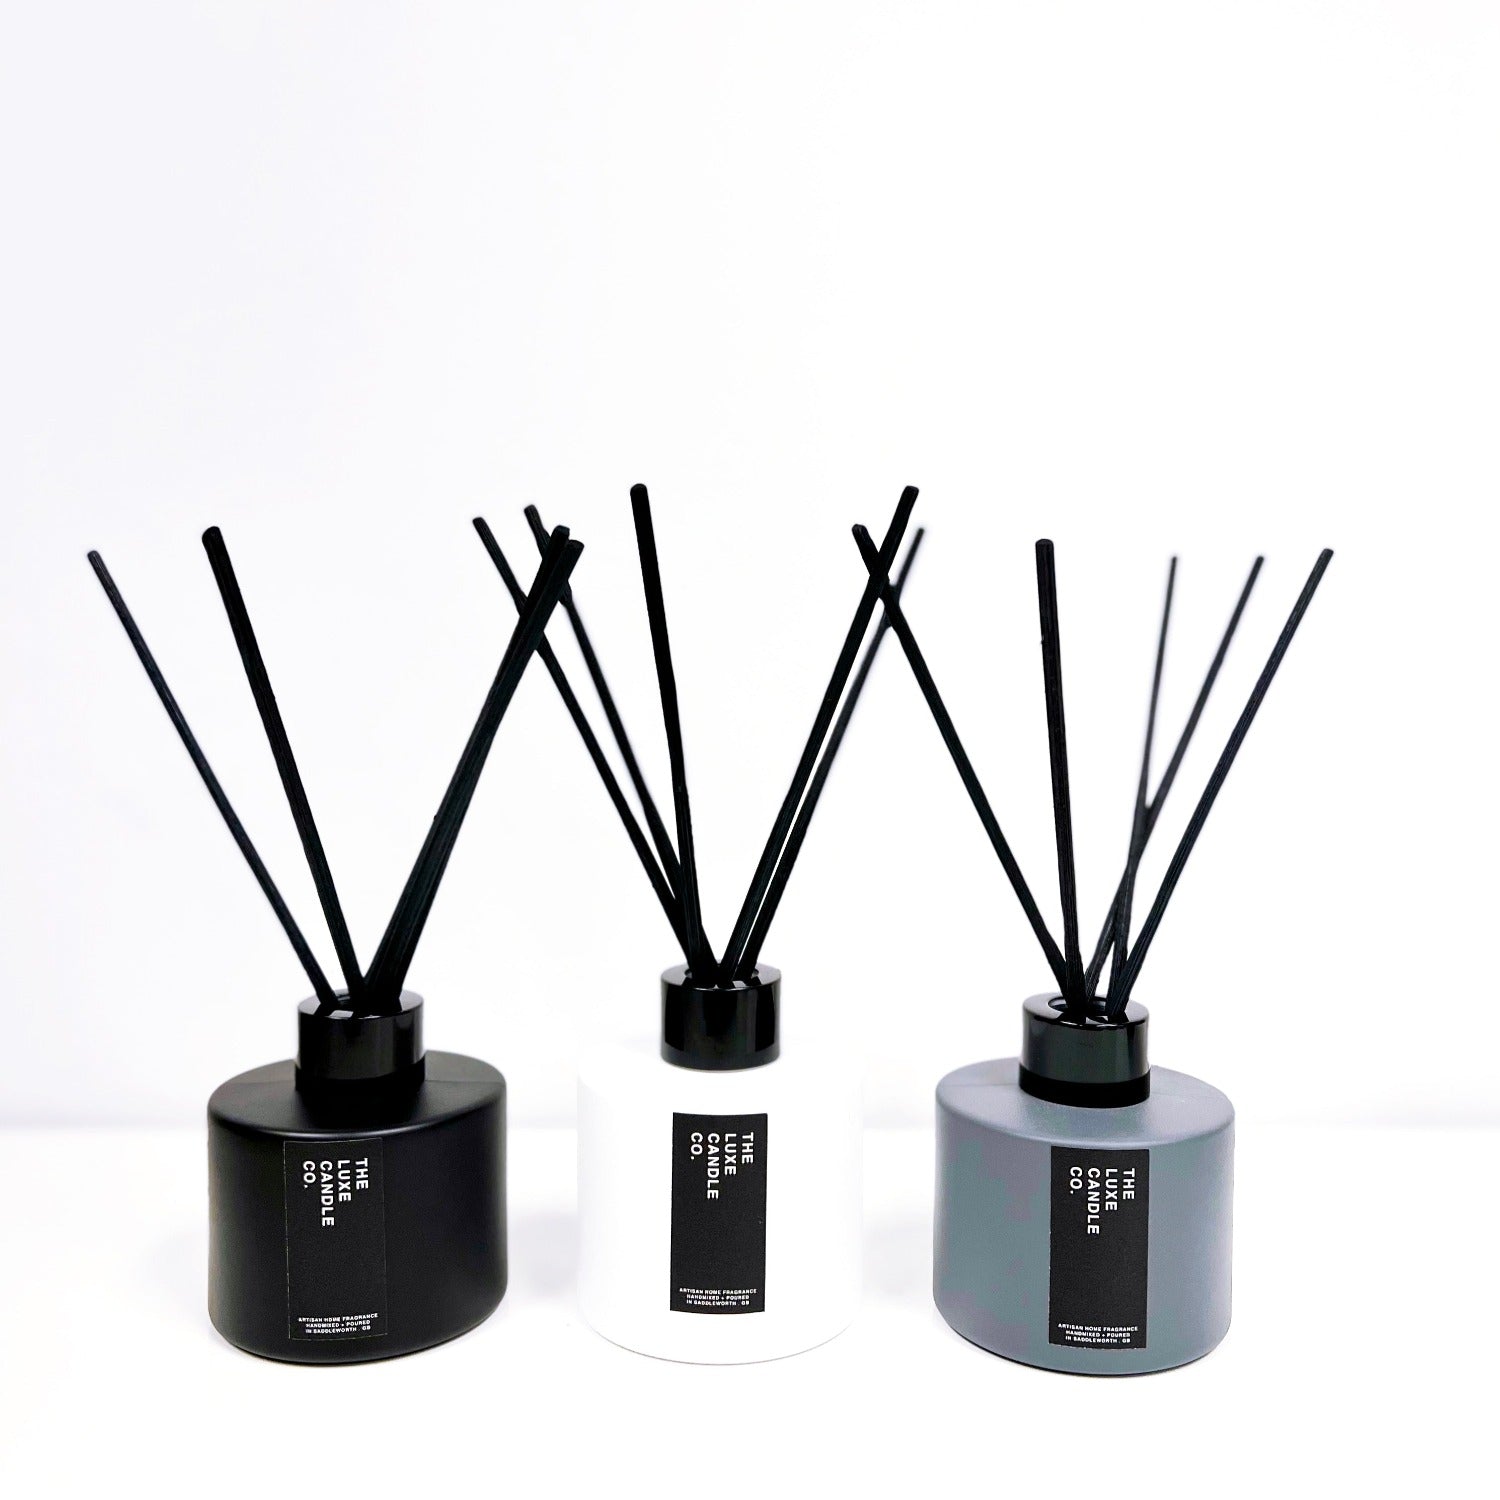 Ginger reed diffuser gift set with white reed diffuser | Best gift idea for zingy fragrances lover UK